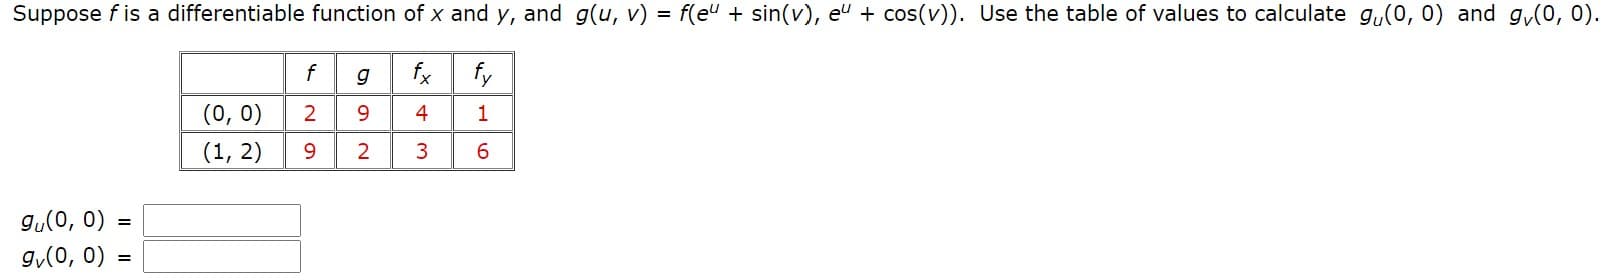 Suppose f is a differentiable function of x and y, and g(u, v) = f(e" + sin(v), eu + cos(v)). Use the table of values to calculate g,(0, 0) and g,(0, 0).
f
g
fx
fy
(0, 0)
(1, 2)
9.
4
1
9.
3
gu(0, 0)
g,(0, 0)
=
